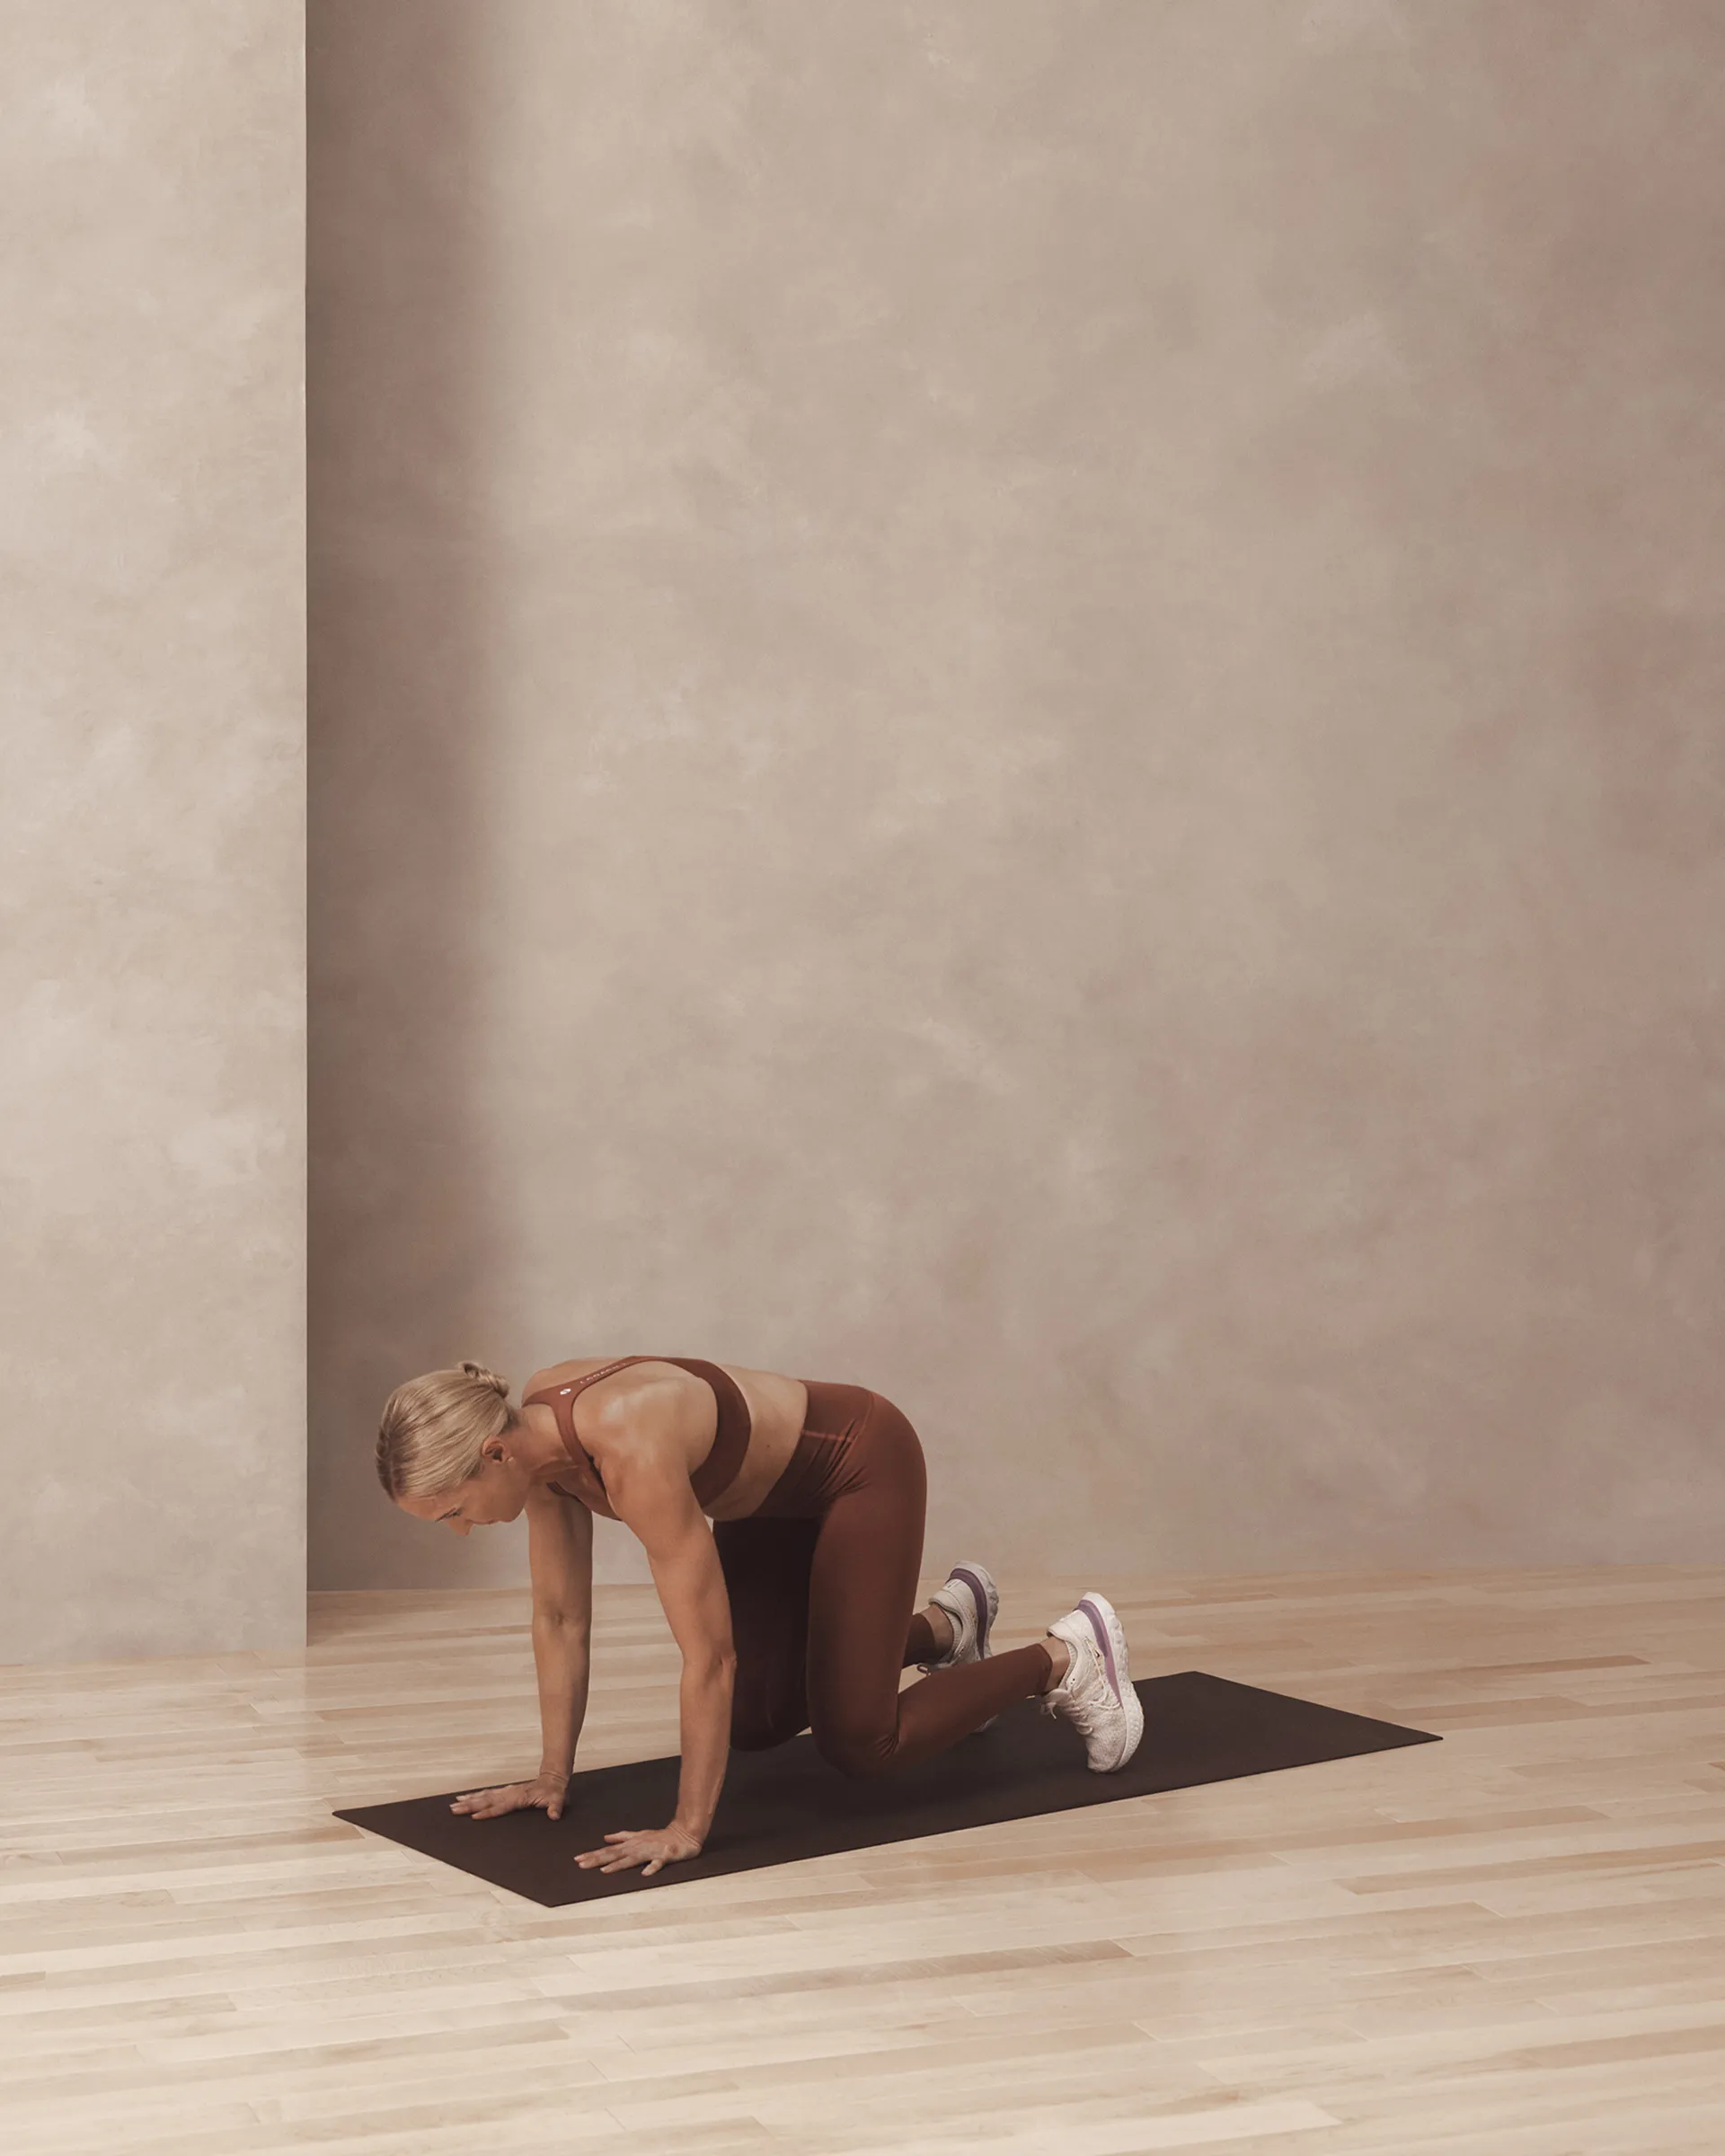 A Life Time member in a bear pose on a yoga mat.